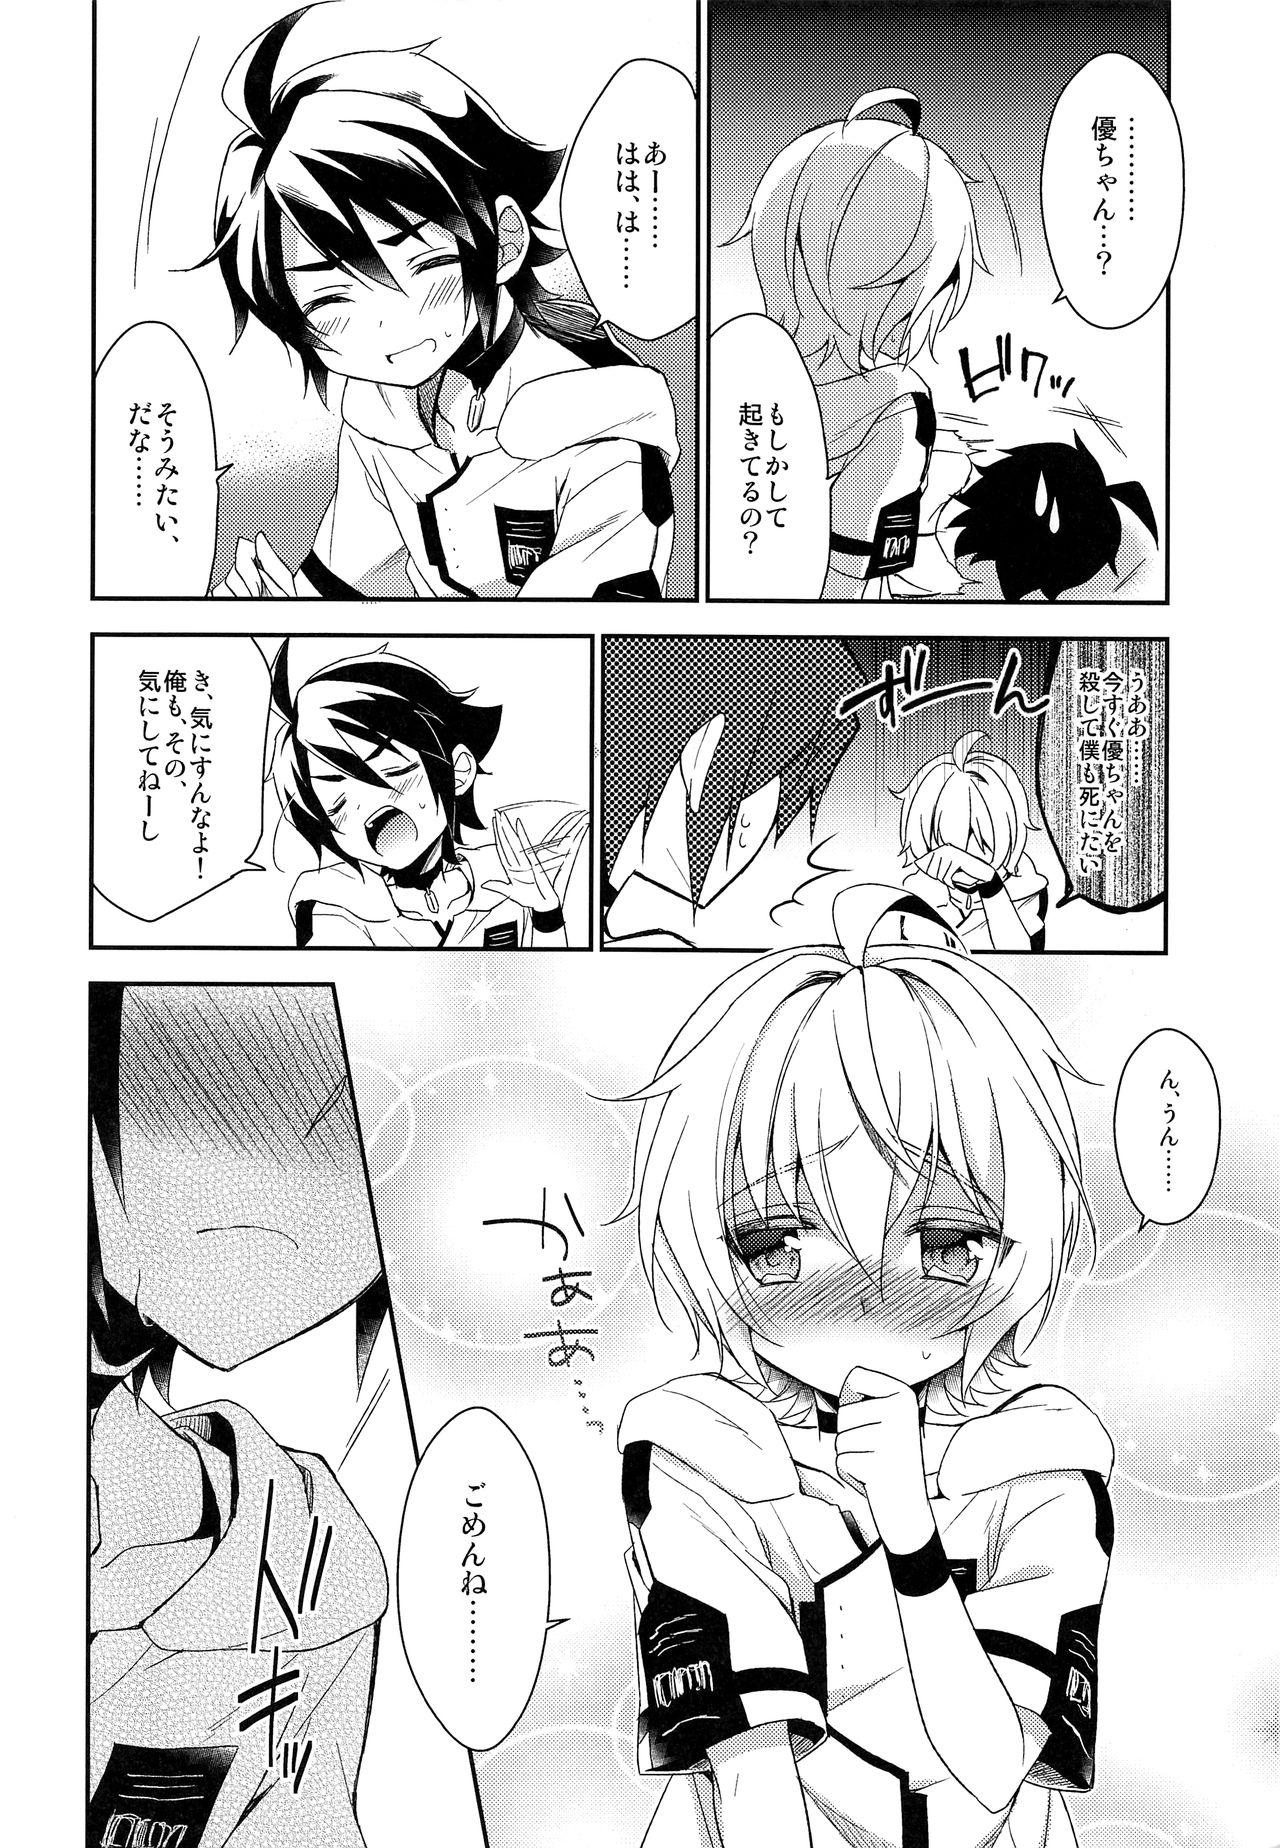  Tenshi no Tawamure - Seraph of the end Pussy To Mouth - Page 5